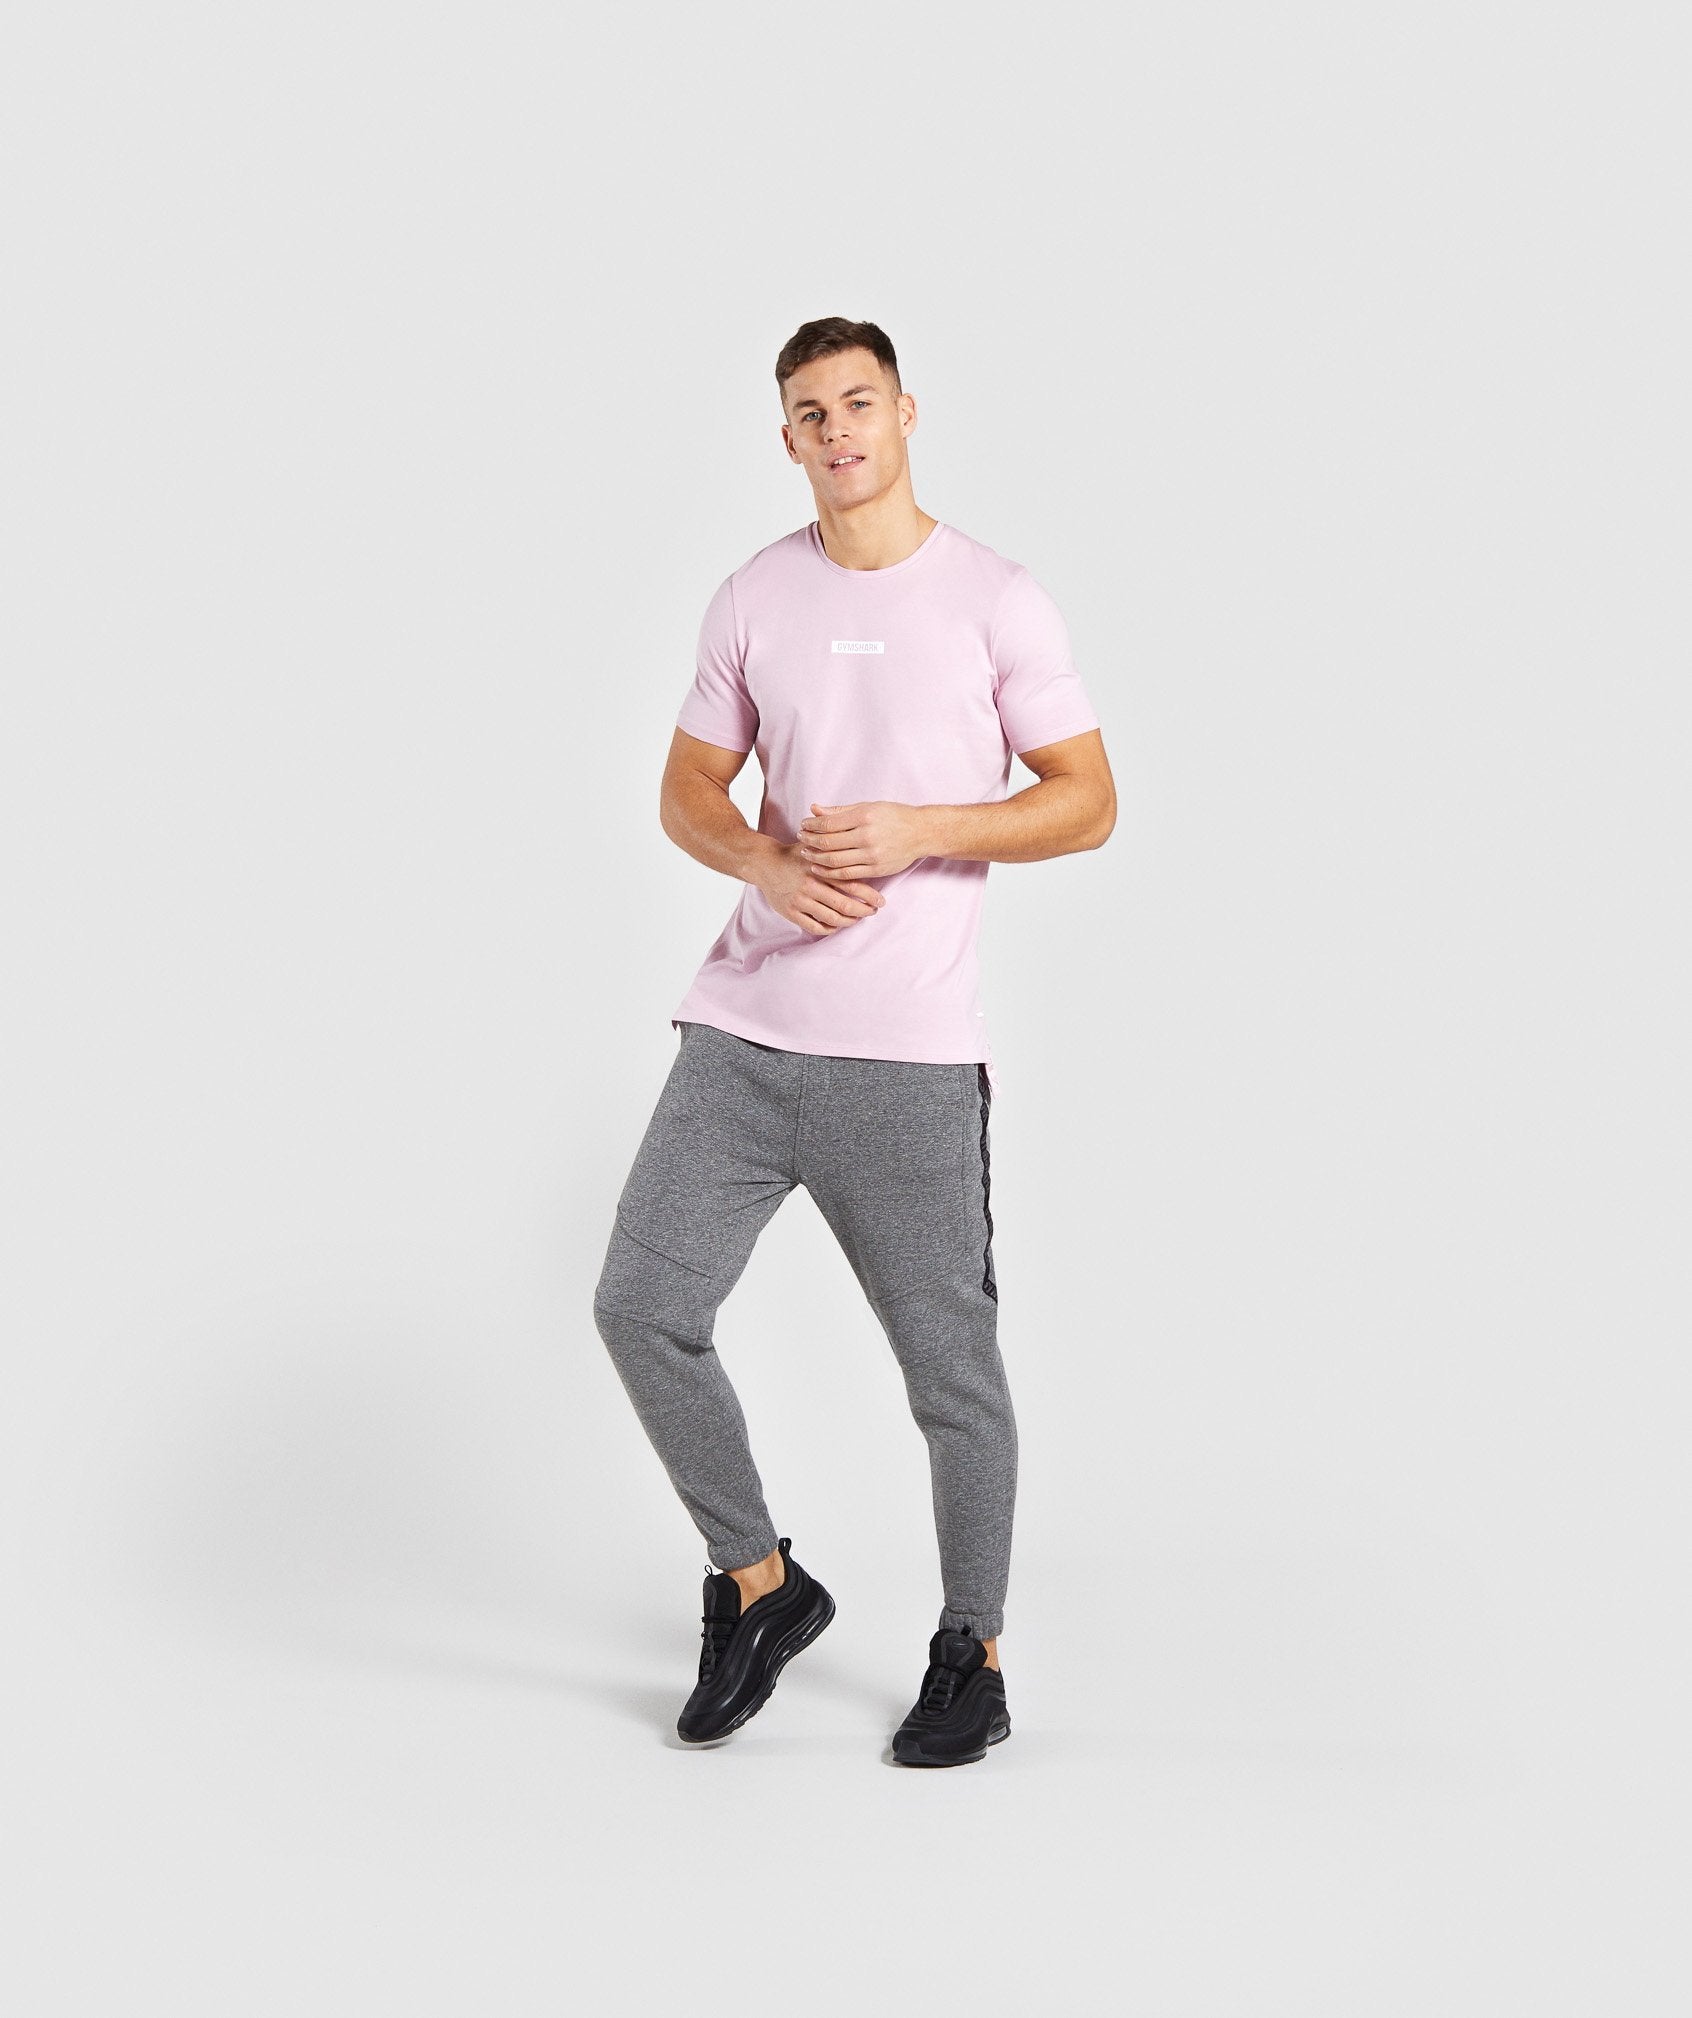 Central T-Shirt in Light Pink - view 4